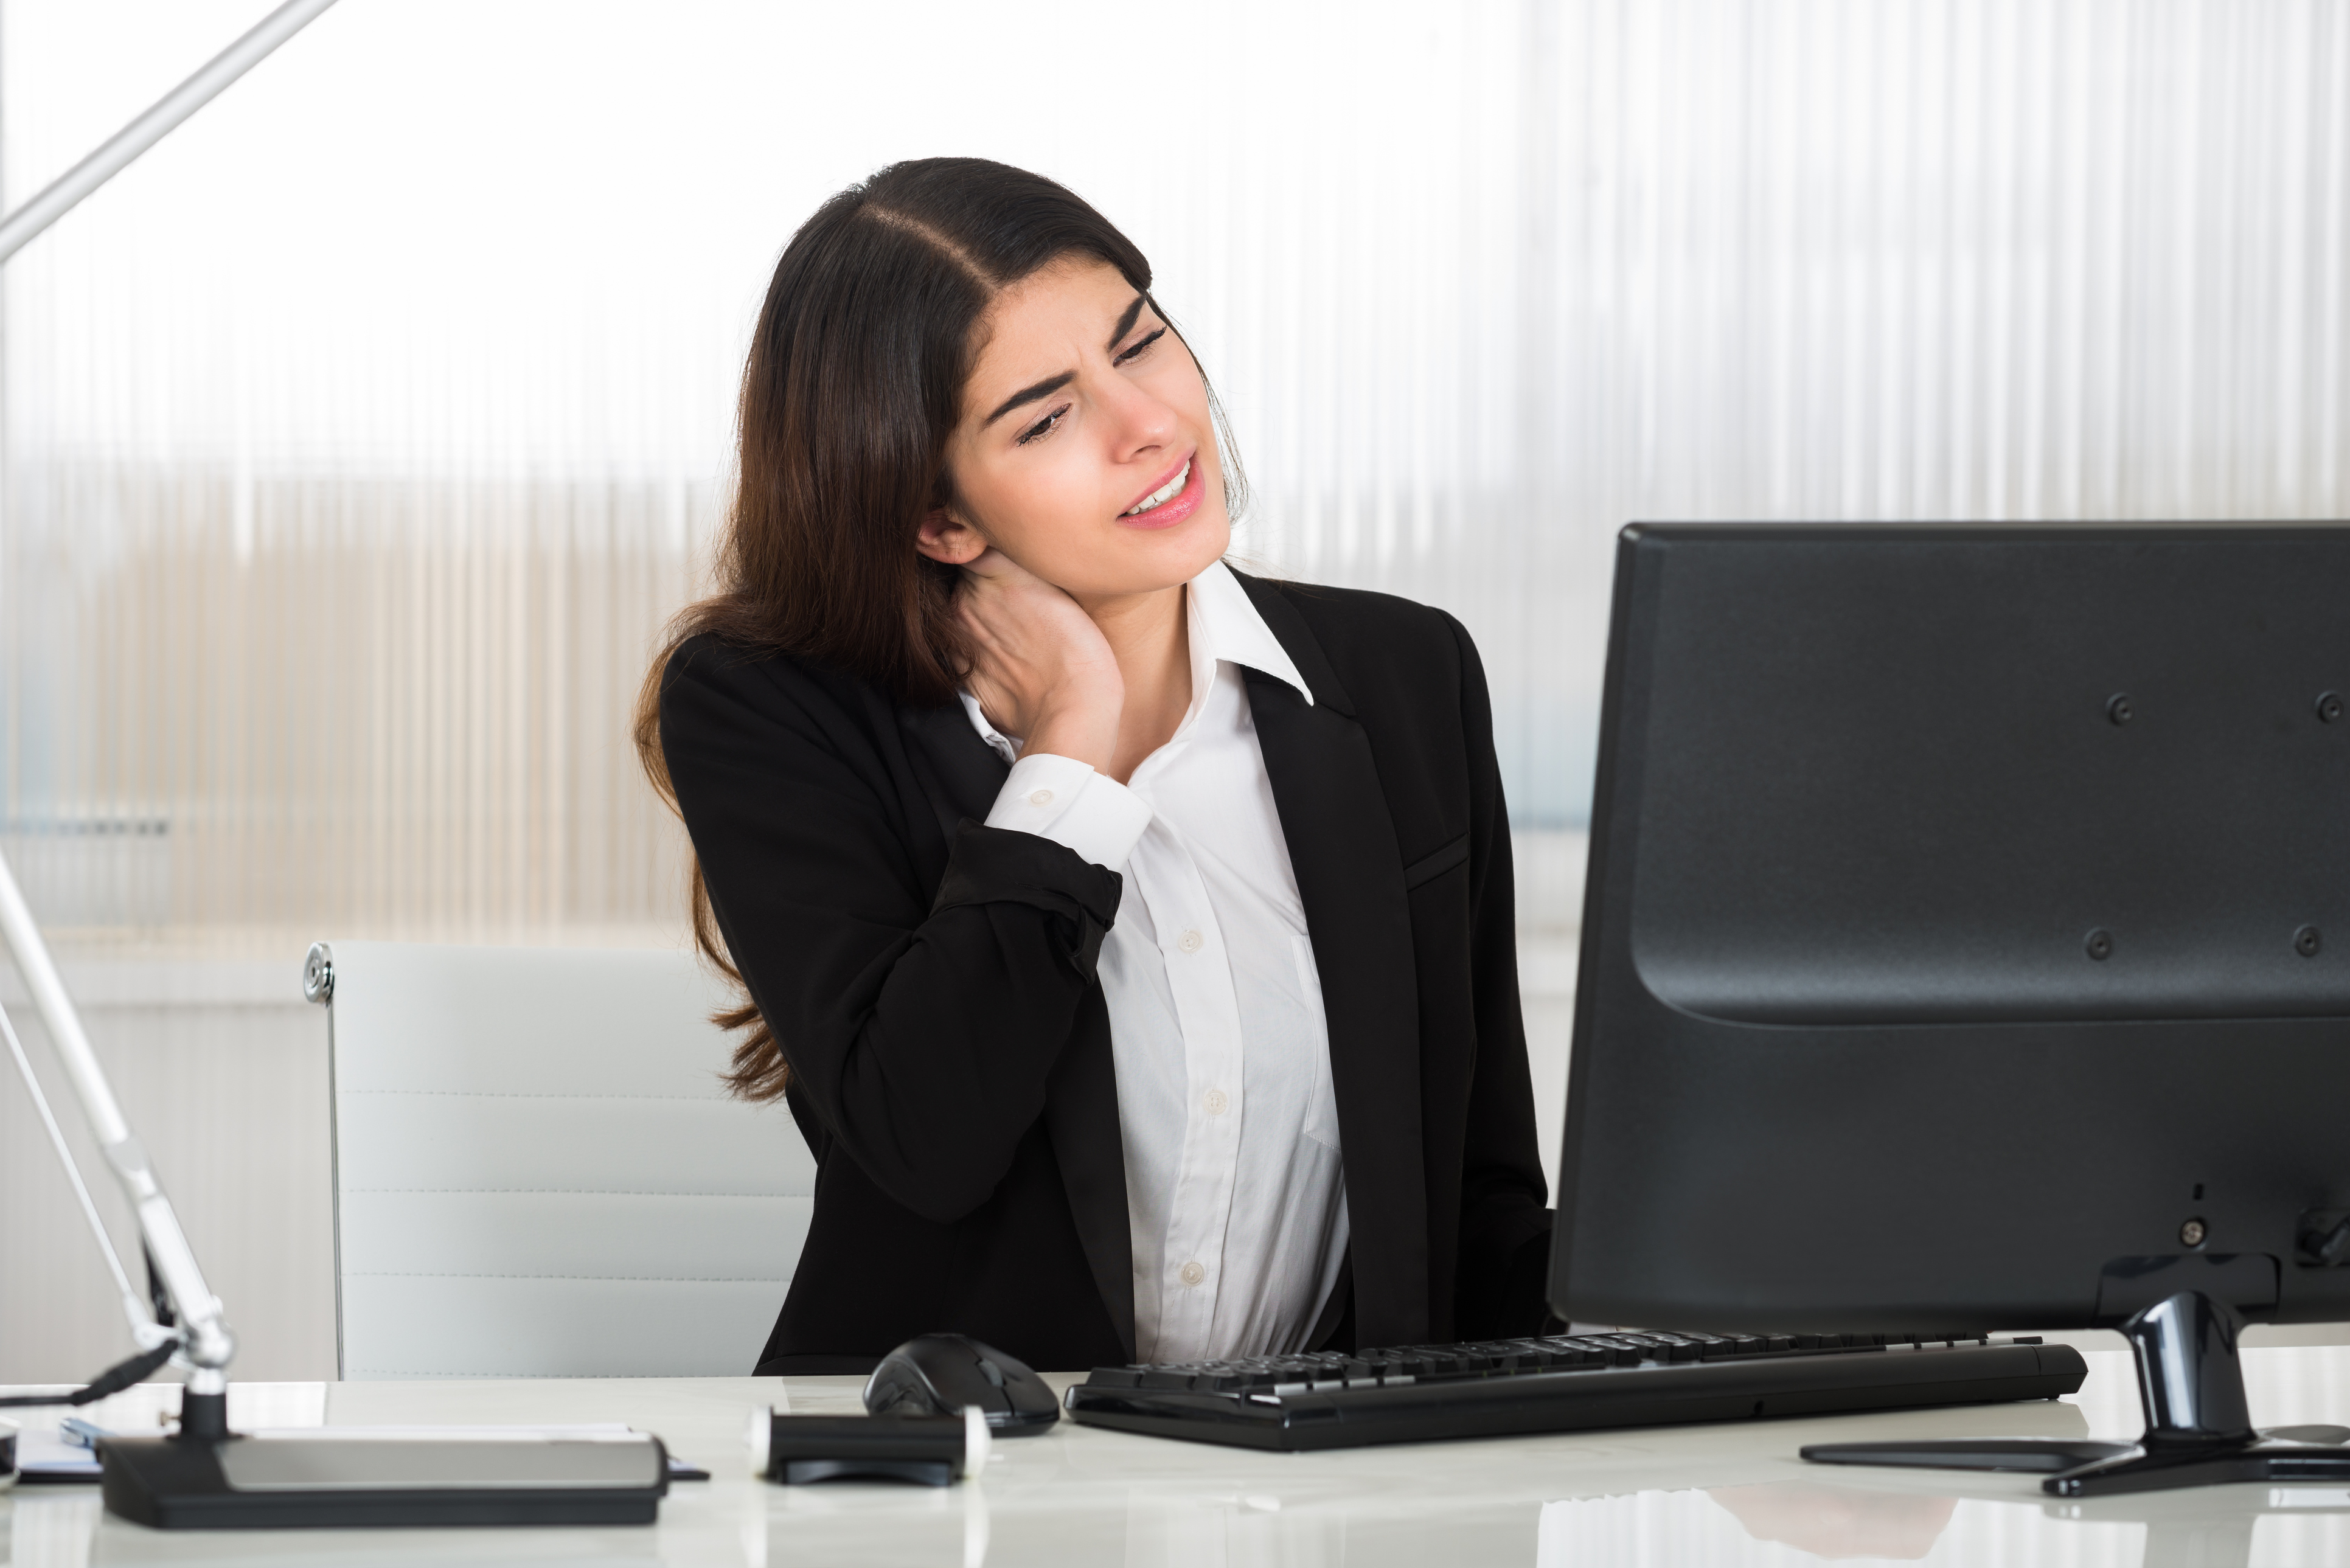 Woman with neck pain from computer posture